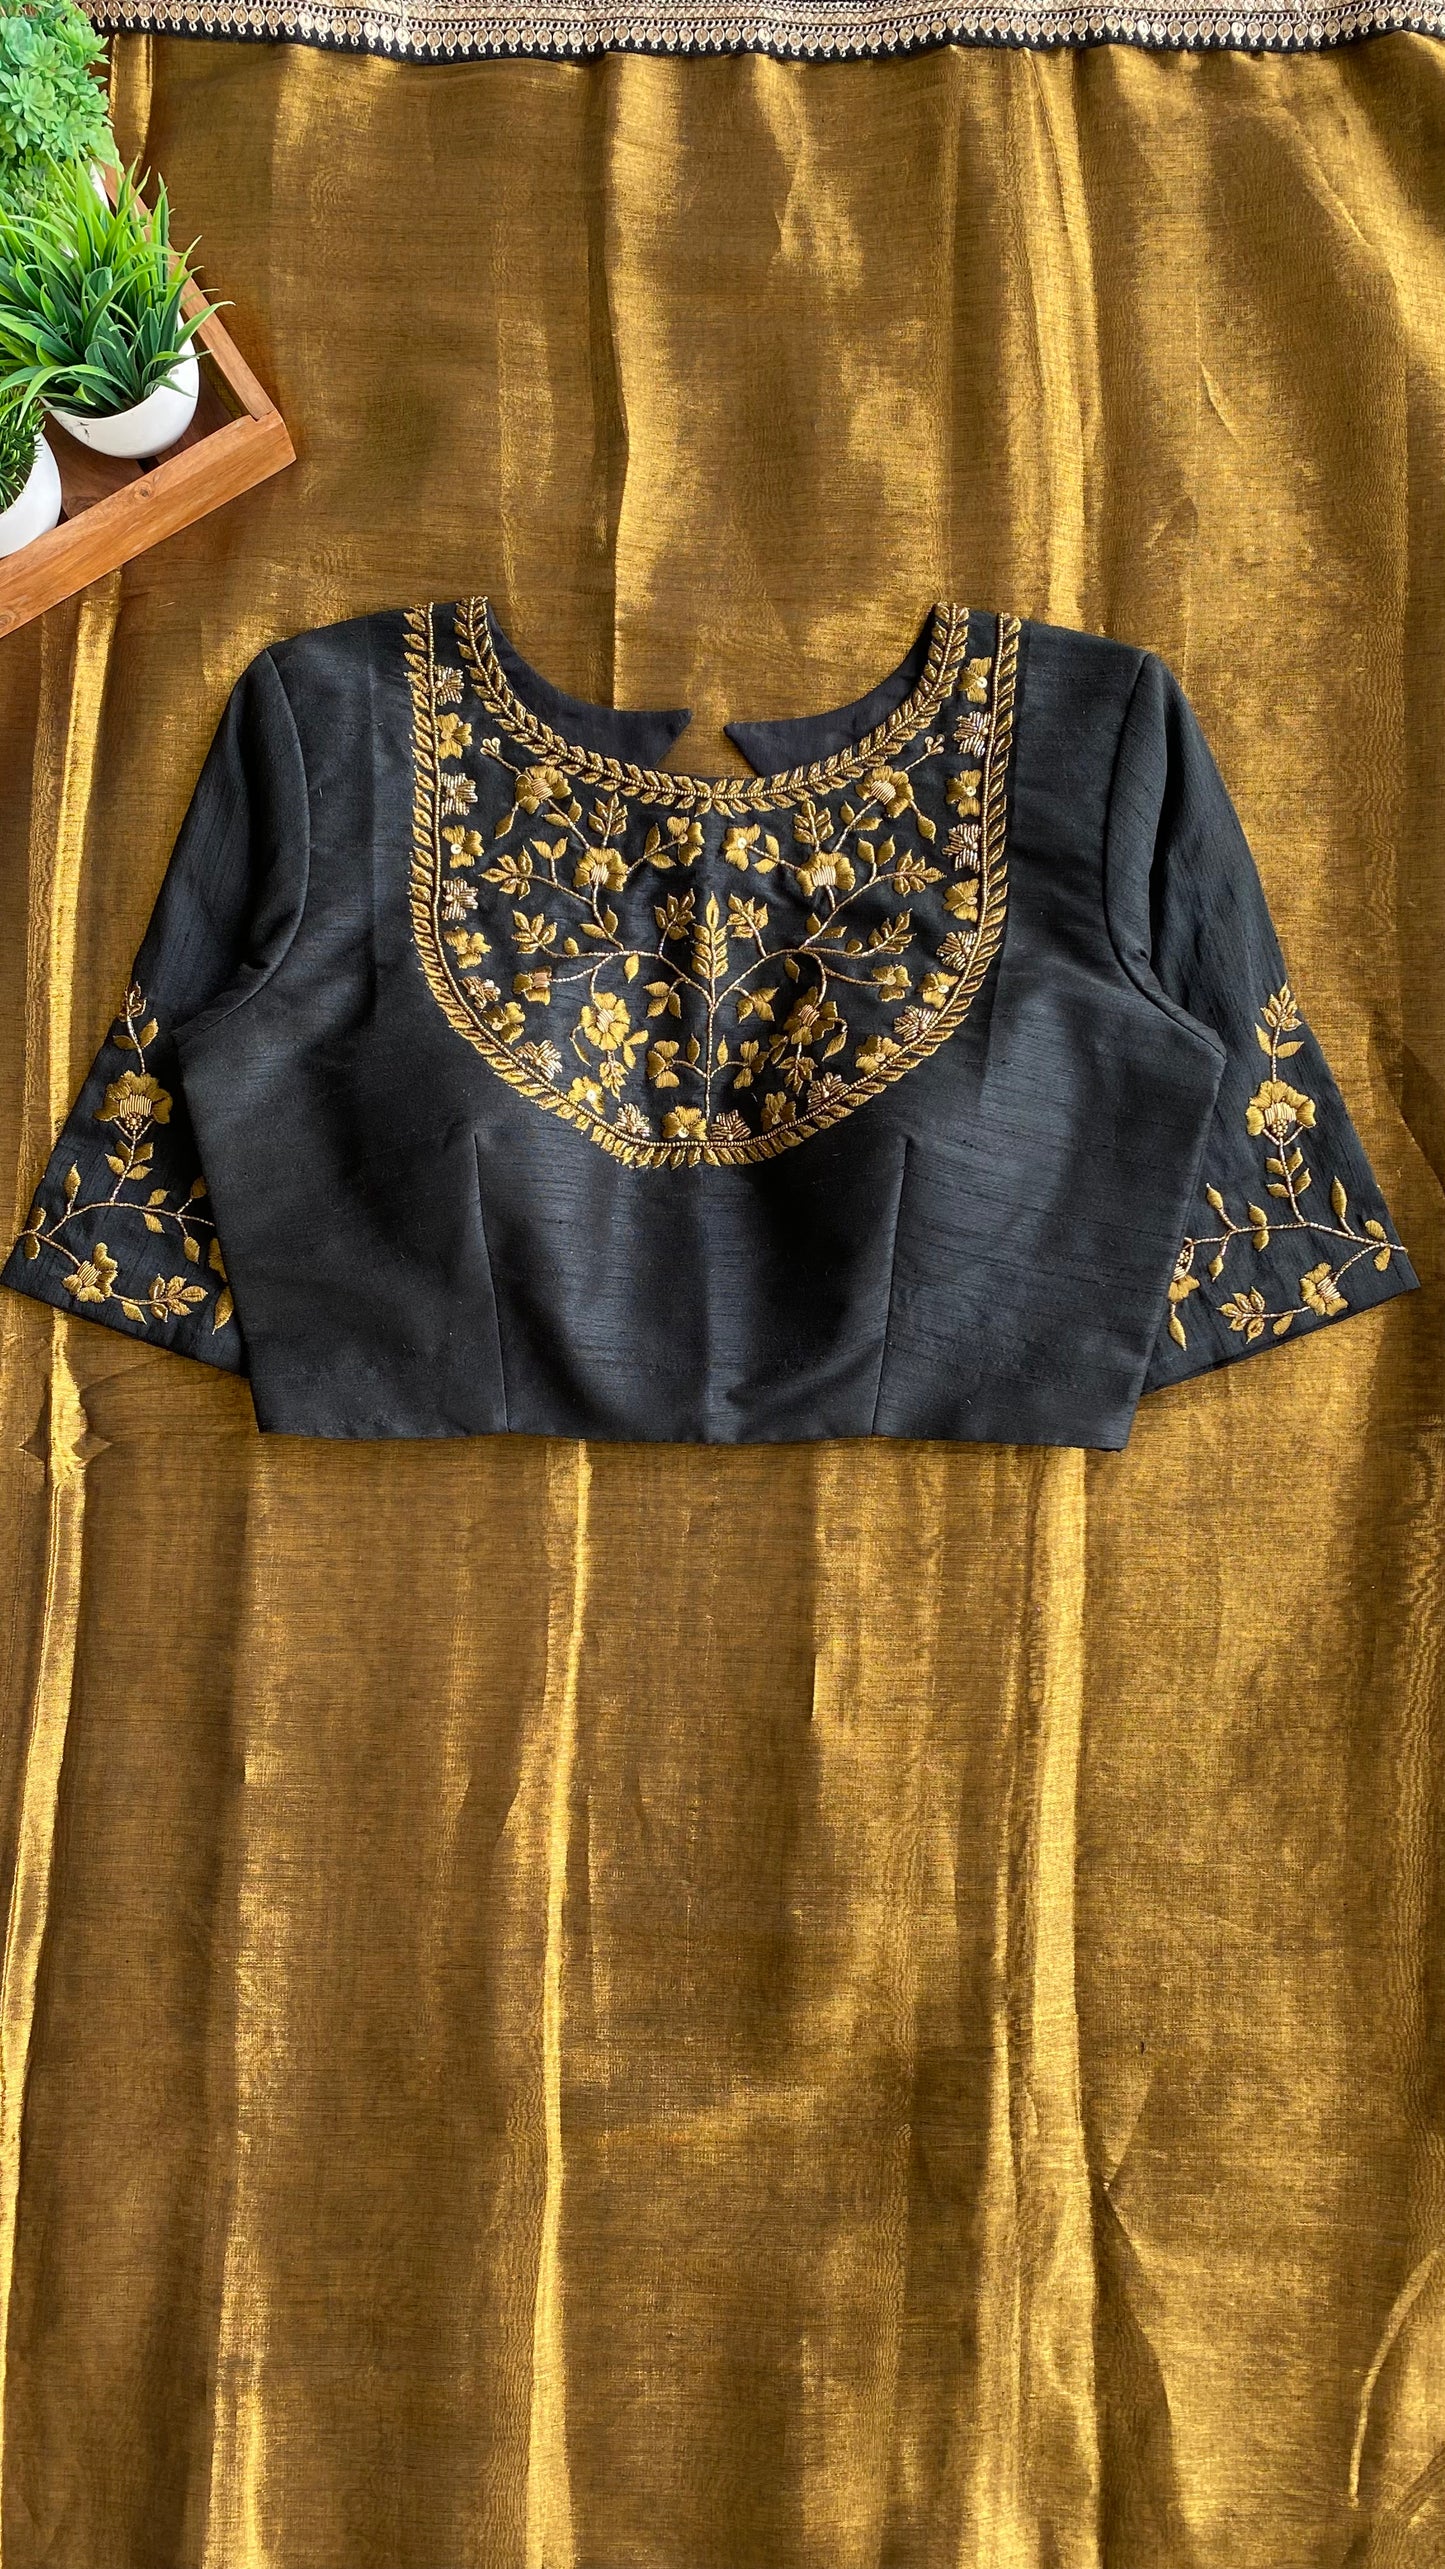 Gold tissue saree with black hand worked blouse